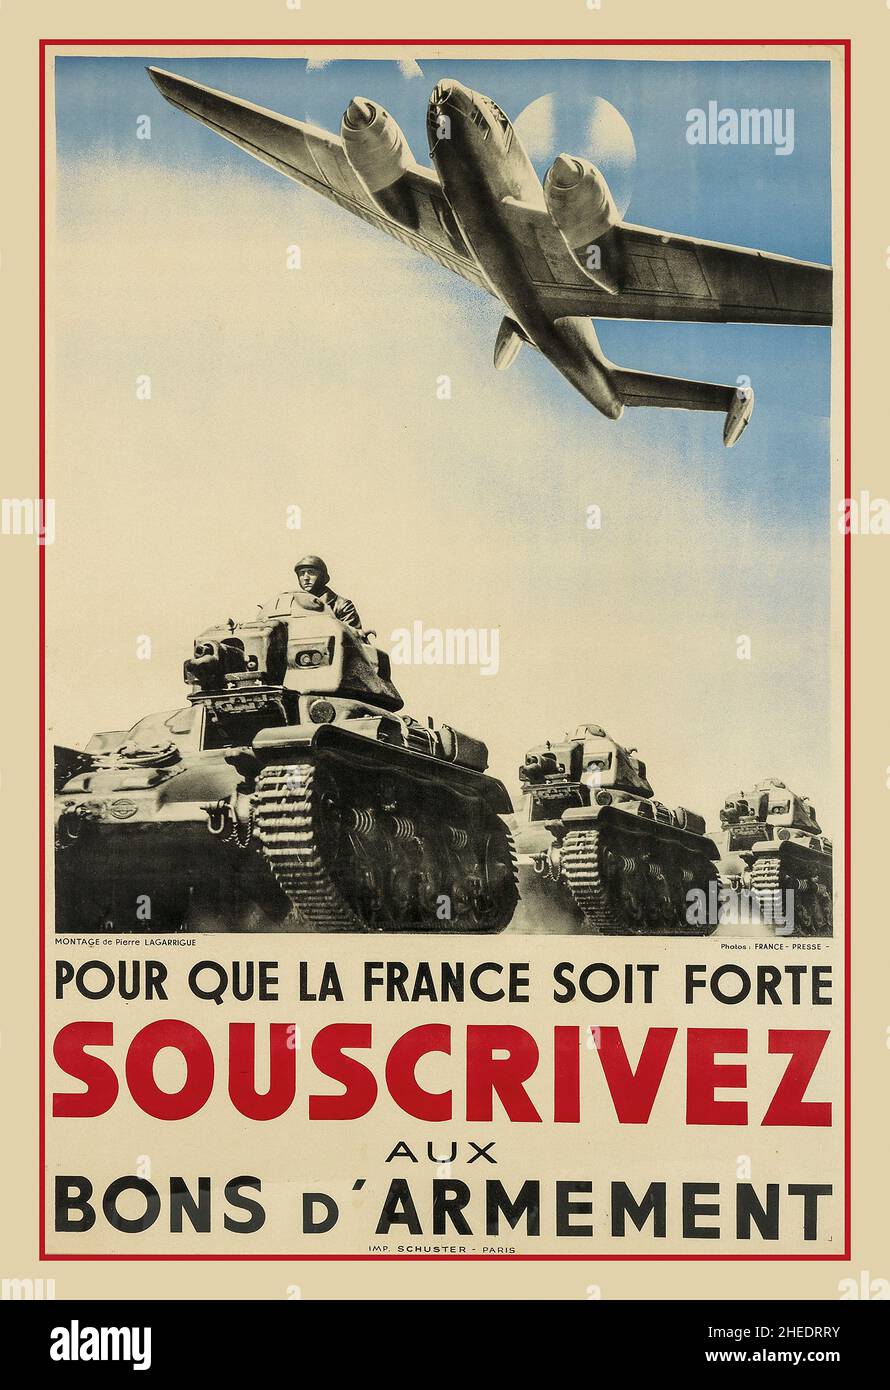 Vintage French World War II Poster 1938/39 'Pour que la France soit forte souscrivez aux bons d'armement' For France to be strong, subscribe to weapons bonds. WW2  Photo Montage Artist: Pierre LaGarrigue Stock Photo